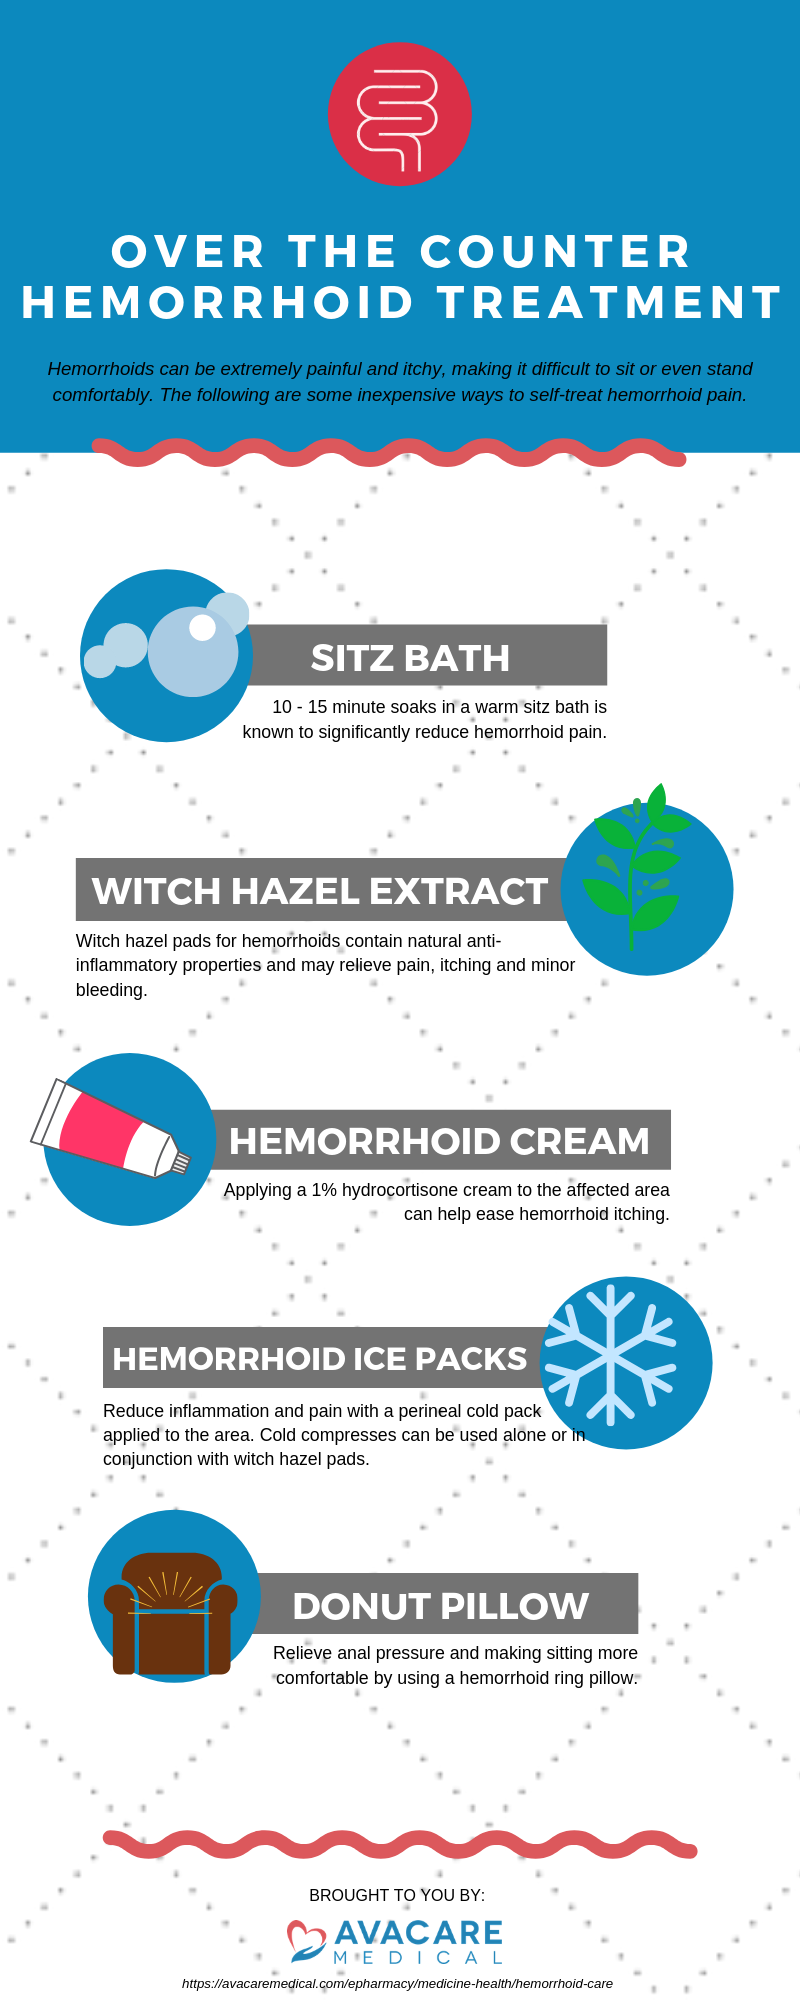 OVER THE COUNTER HEMORRHOID TREATMENT | Hemorrhoids can be extremely painful and itchy, making it difficult to sit or even stand comfortably. The following are some inexpensive ways to self-treat hemorrhoid pain. | Pain Relief - Sitz Bath: 10 - 15 minute soaks in a warm sitz bath is known to significantly reduce hemorrhoid pain. | Itch Relief - Hemmorhoid Cream: Applying a 1% hydrocortisone cream to the affected area can help ease hemorrhoid itching. | Inflammation Reduction - Witch Hazel Extract: Witch hazel pads for hemorrhoids contain natural anti-inflammatory properties and may relieve pain, itching and minor bleeding. | Inflammation Reduction – Hemorrhoid Ice Packs: Reduce inflammation and pain with a perineal cold pack applied to the area. Cold compresses can be used alone or in conjunction with witch hazel pads. | Seated Relief - Donut Pillow: Relieve anal pressure and making sitting more comfortable by using a hemorrhoid ring pillow.